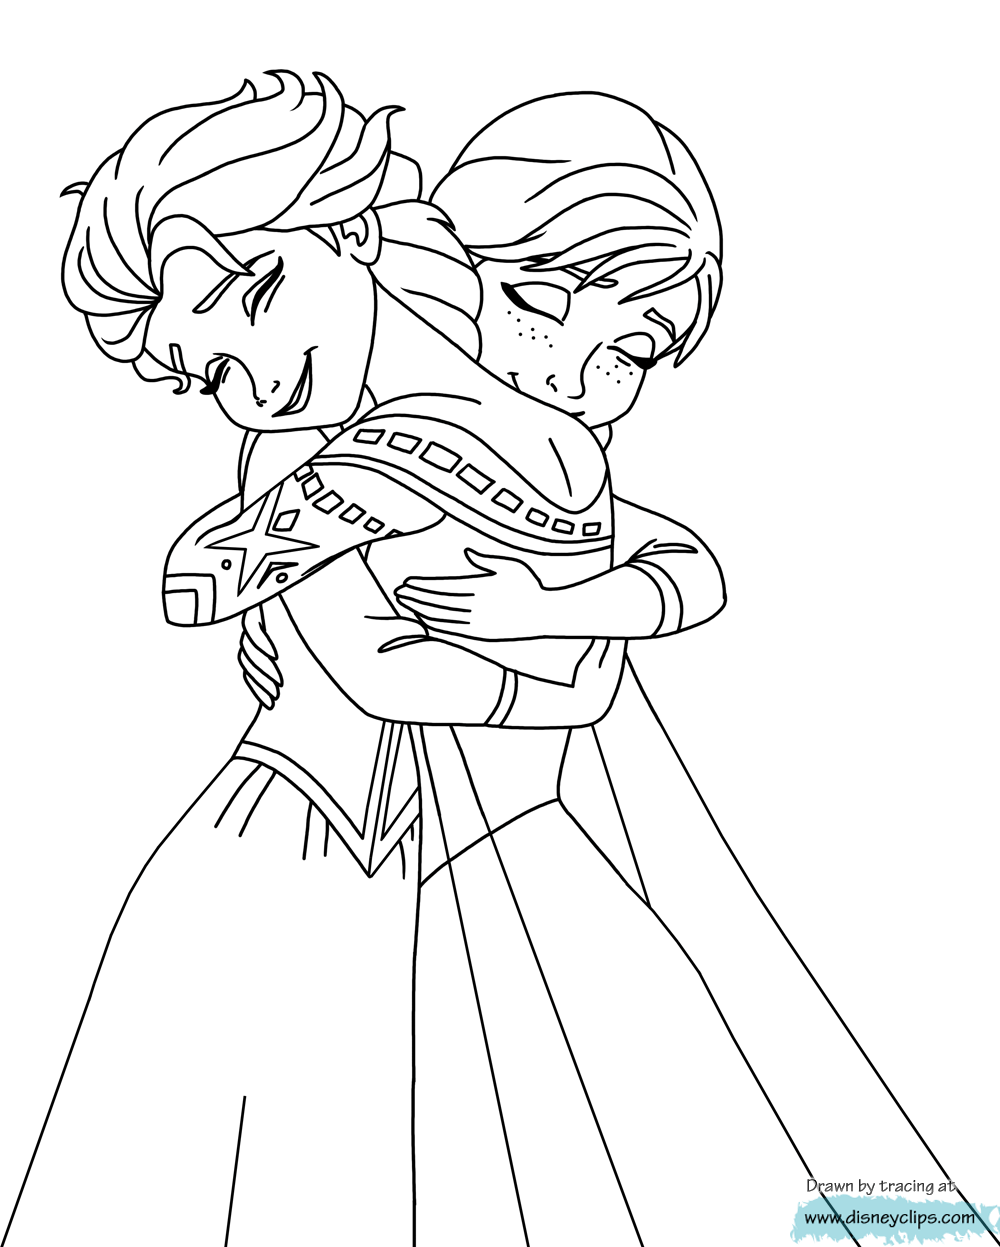 Frozen free to color for children   Frozen Kids Coloring Pages